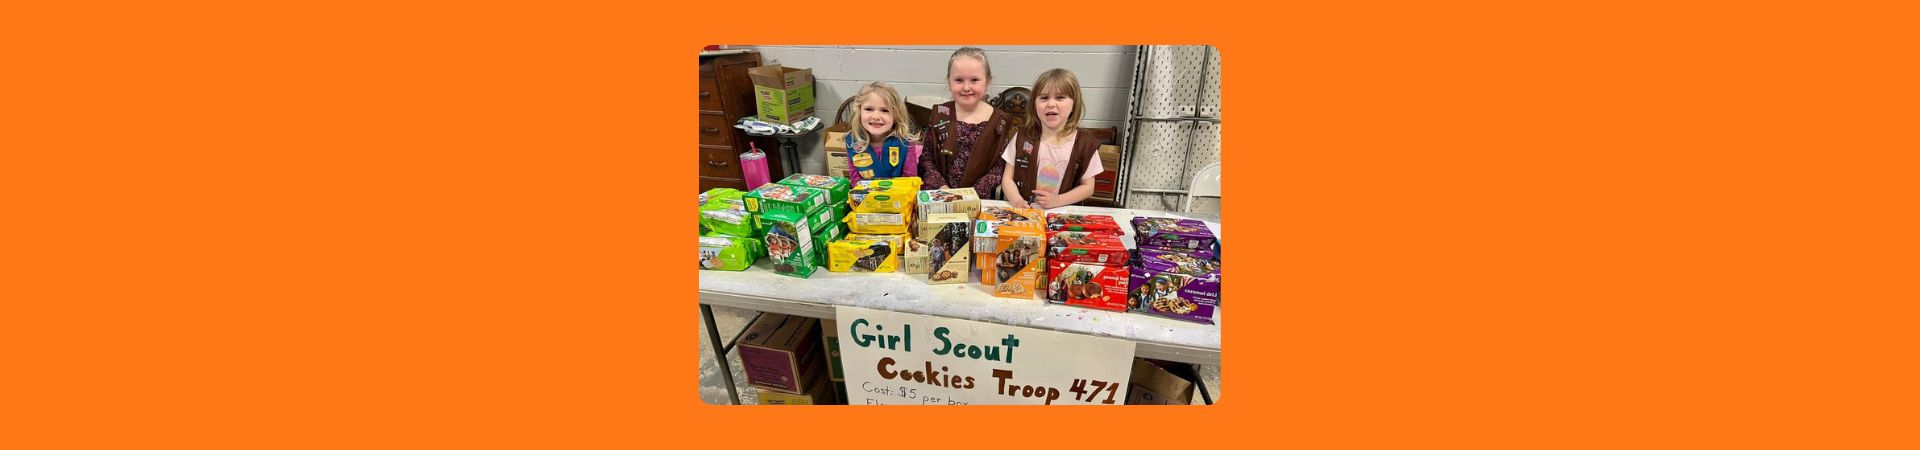  Three Girl Scouts from troop 471 at their cookie booth 